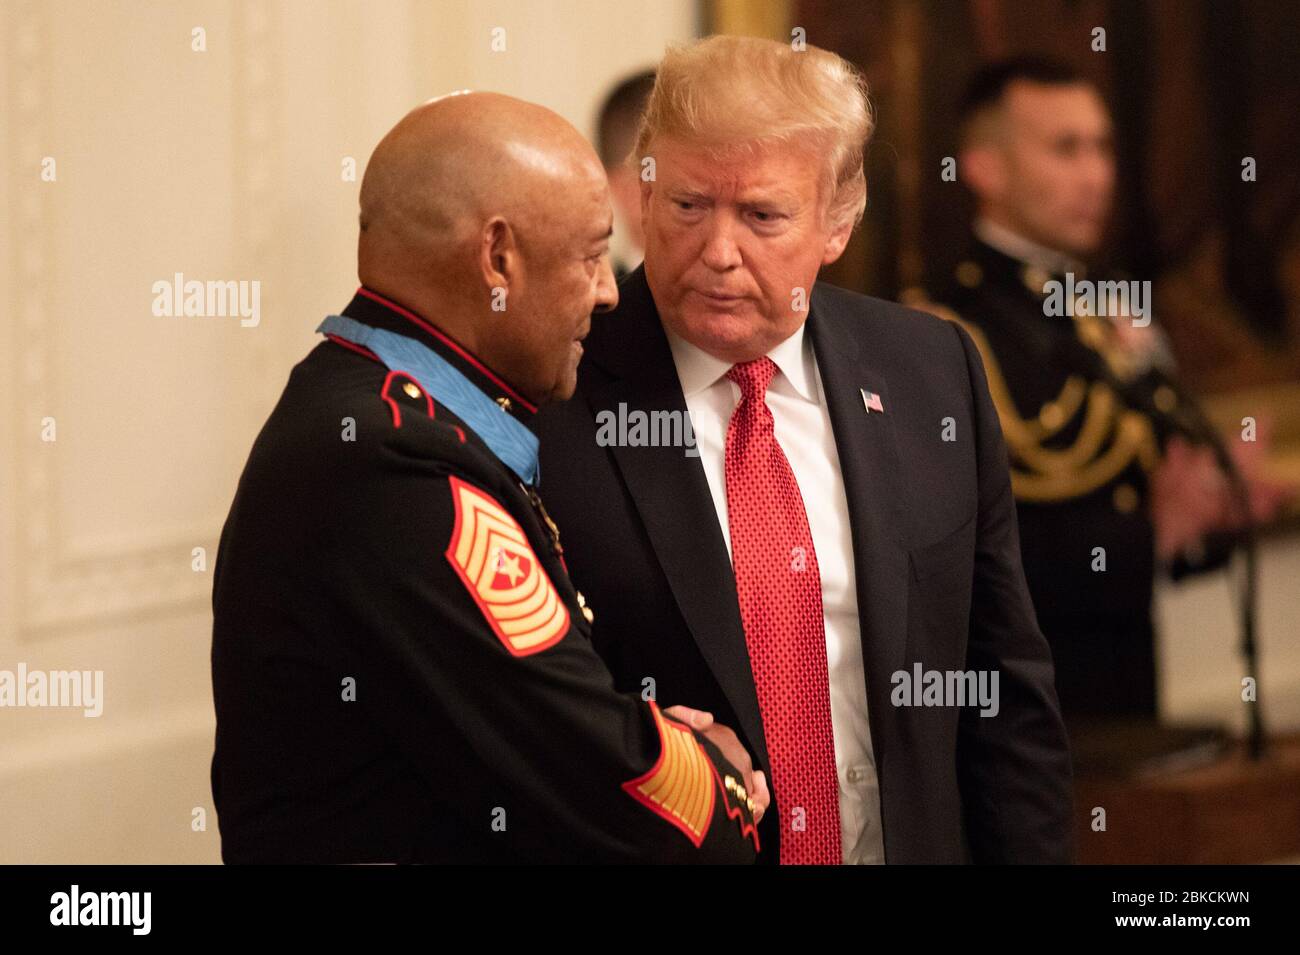 President Donald J. Trump presents the Medal of Honor to retired U.S. Marine Sgt. Maj. John Canley Wednesday, Oct. 17, 2018, in the East Room of the White House. President Donald J. Trump Presents the Medal of Honor Stock Photo